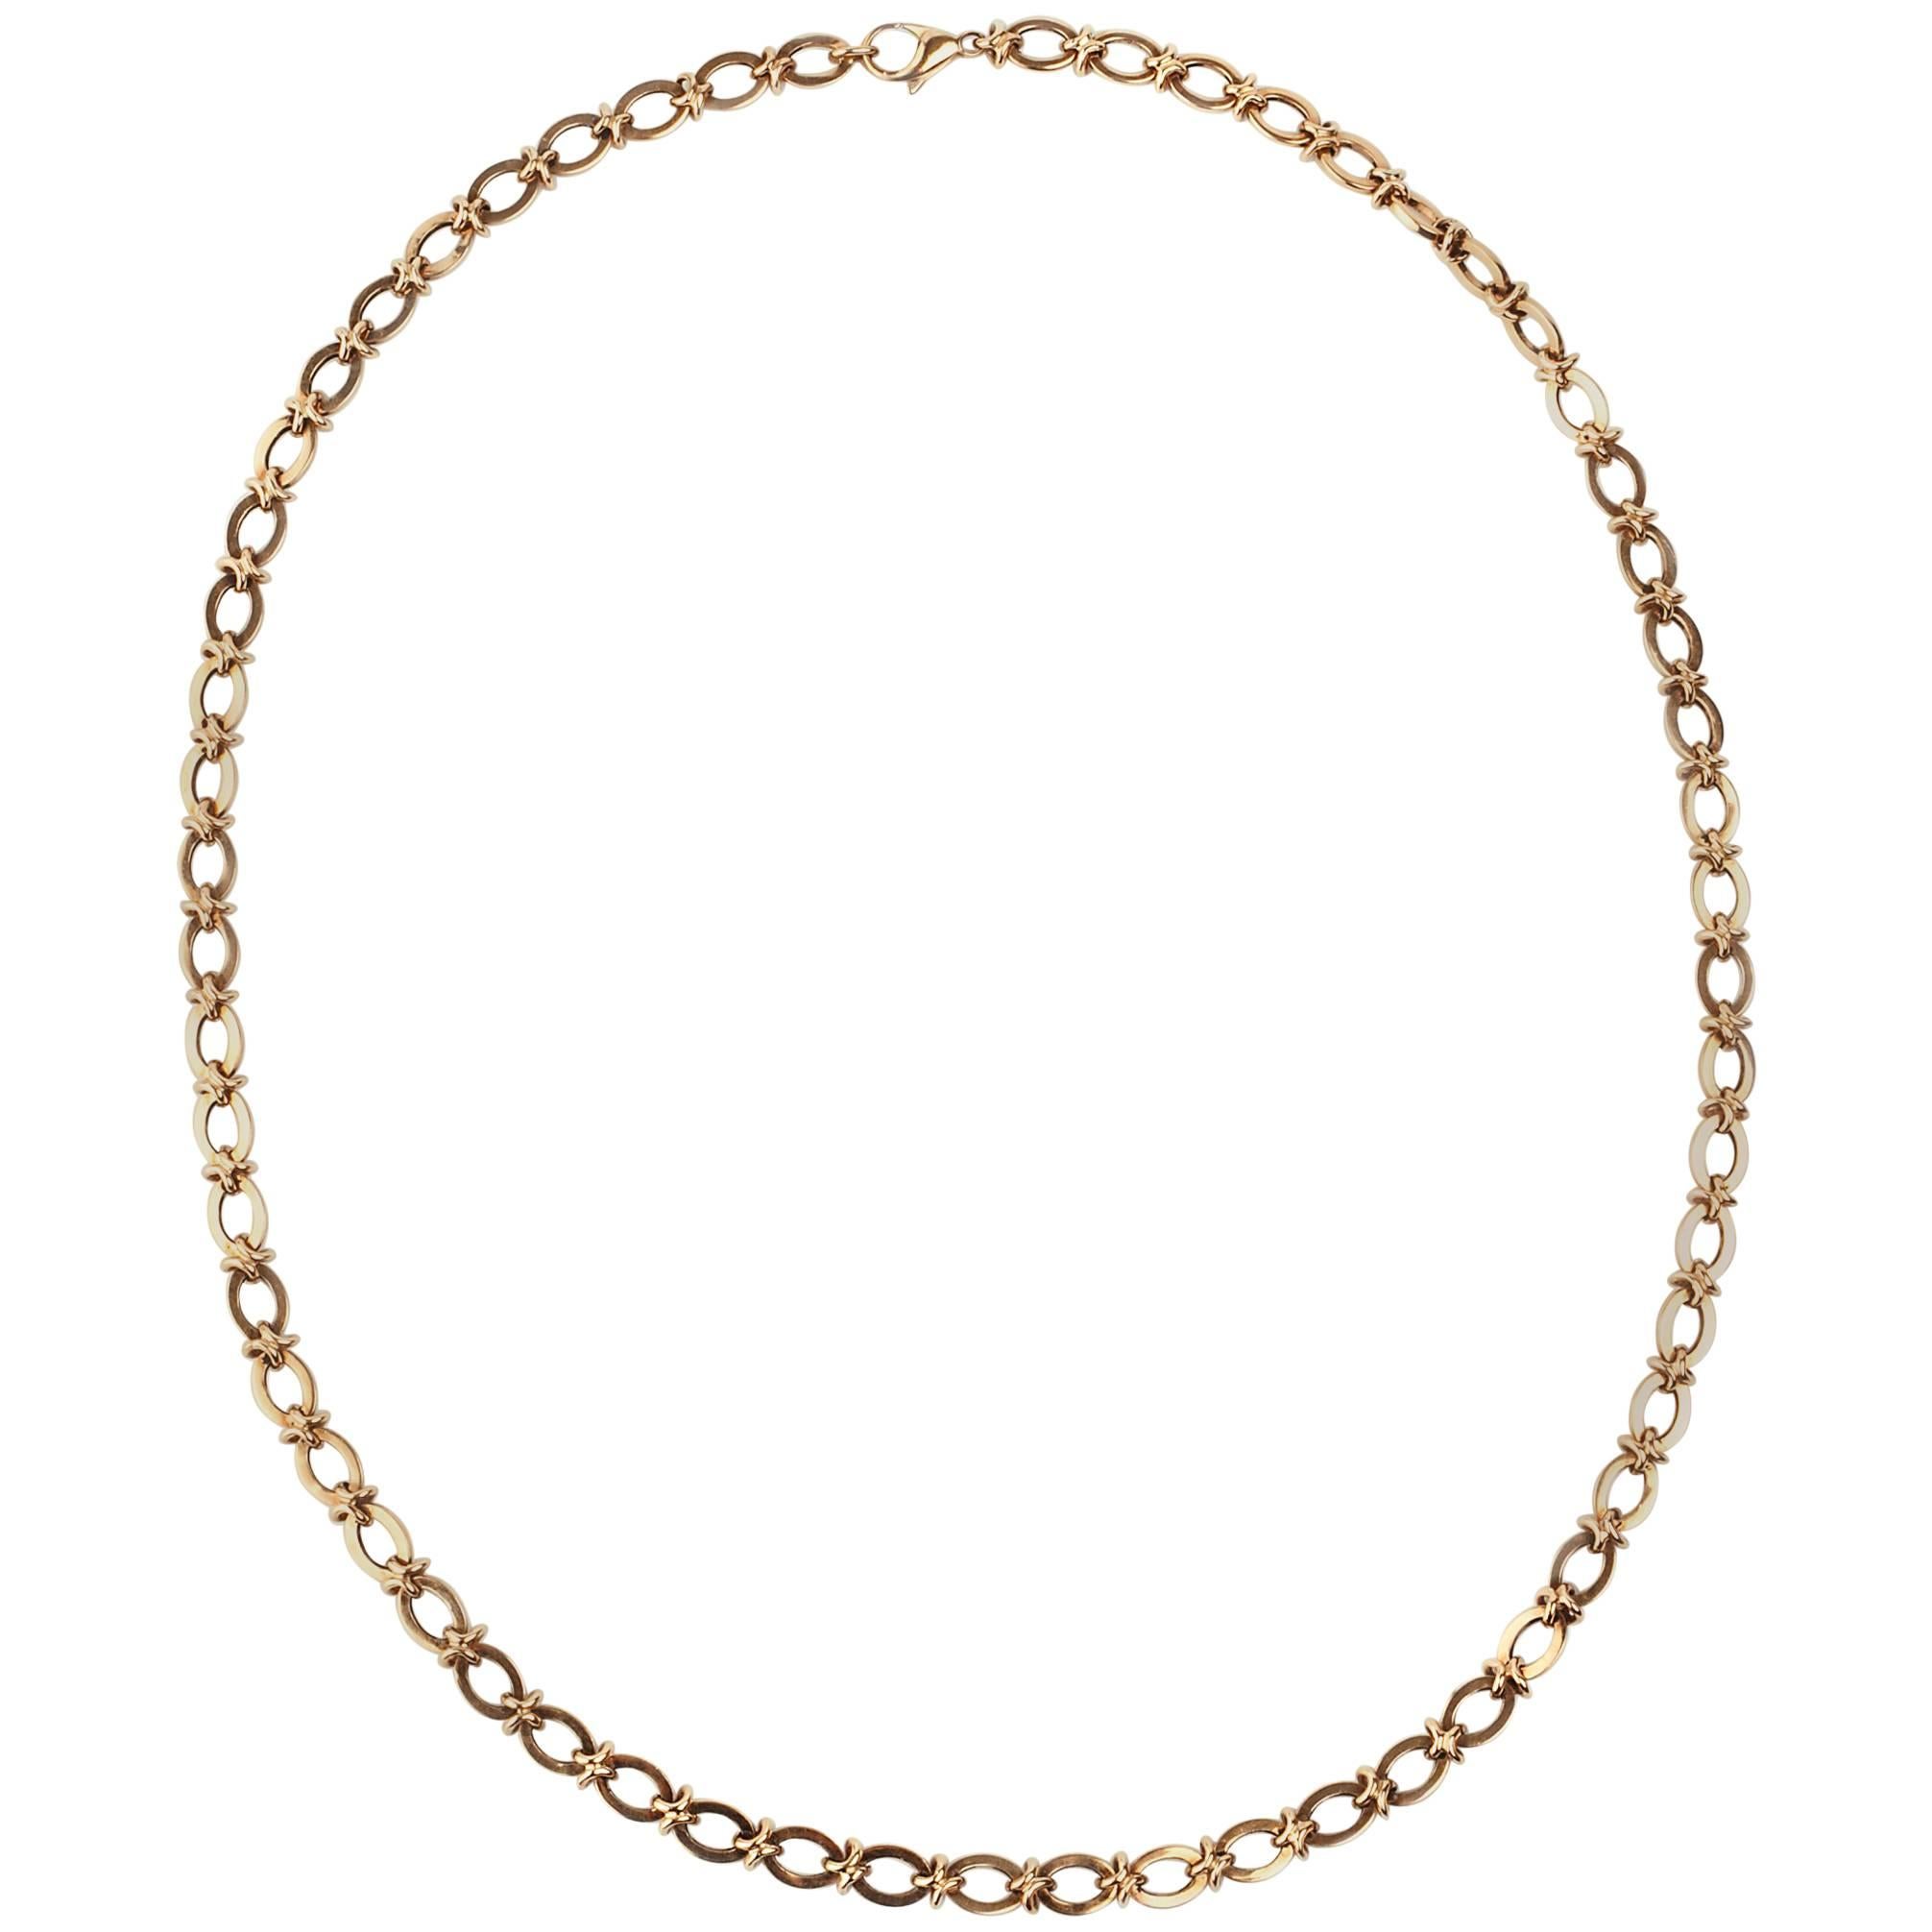 Heavy Cropp and Farr 9 Karat Gold Chain For Sale